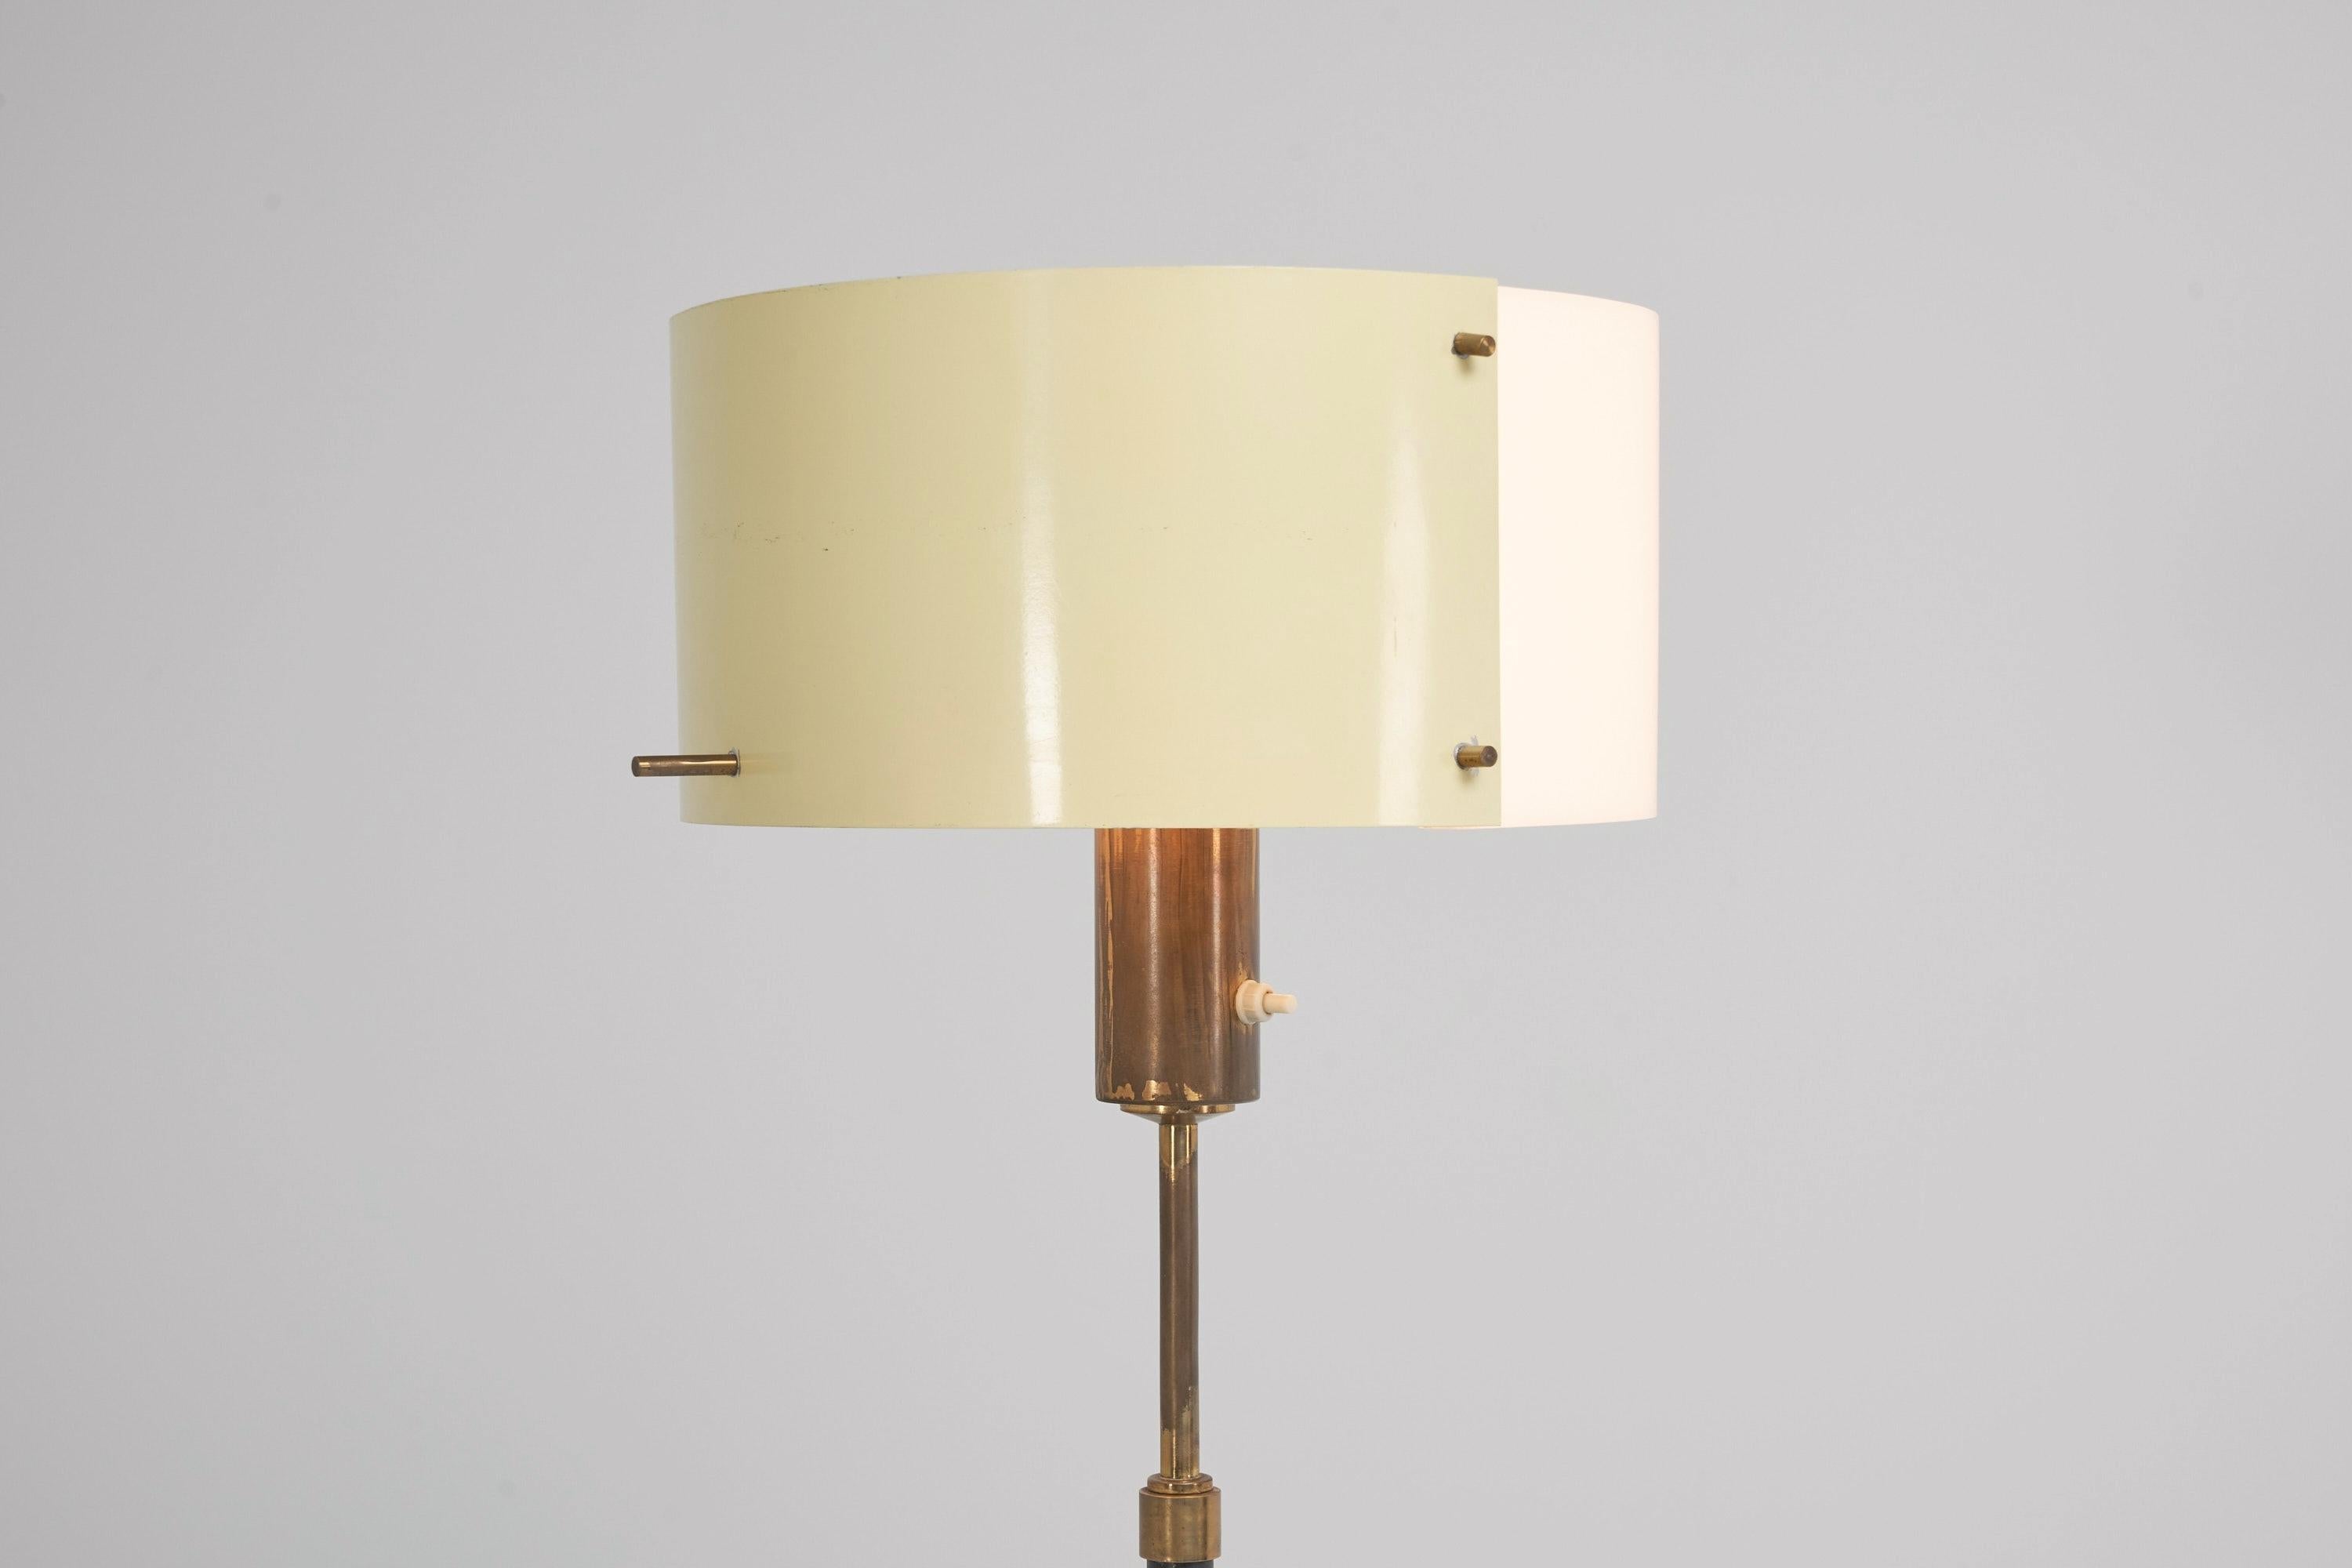 Minimalistic adjustable floor lamp designed and manufactured by Stilnovo, Italy, 1950. This floor lamp has a tripod base in black painted metal, it features brass tipped feet which look like the spacecraft landing gear where many lamp designs from